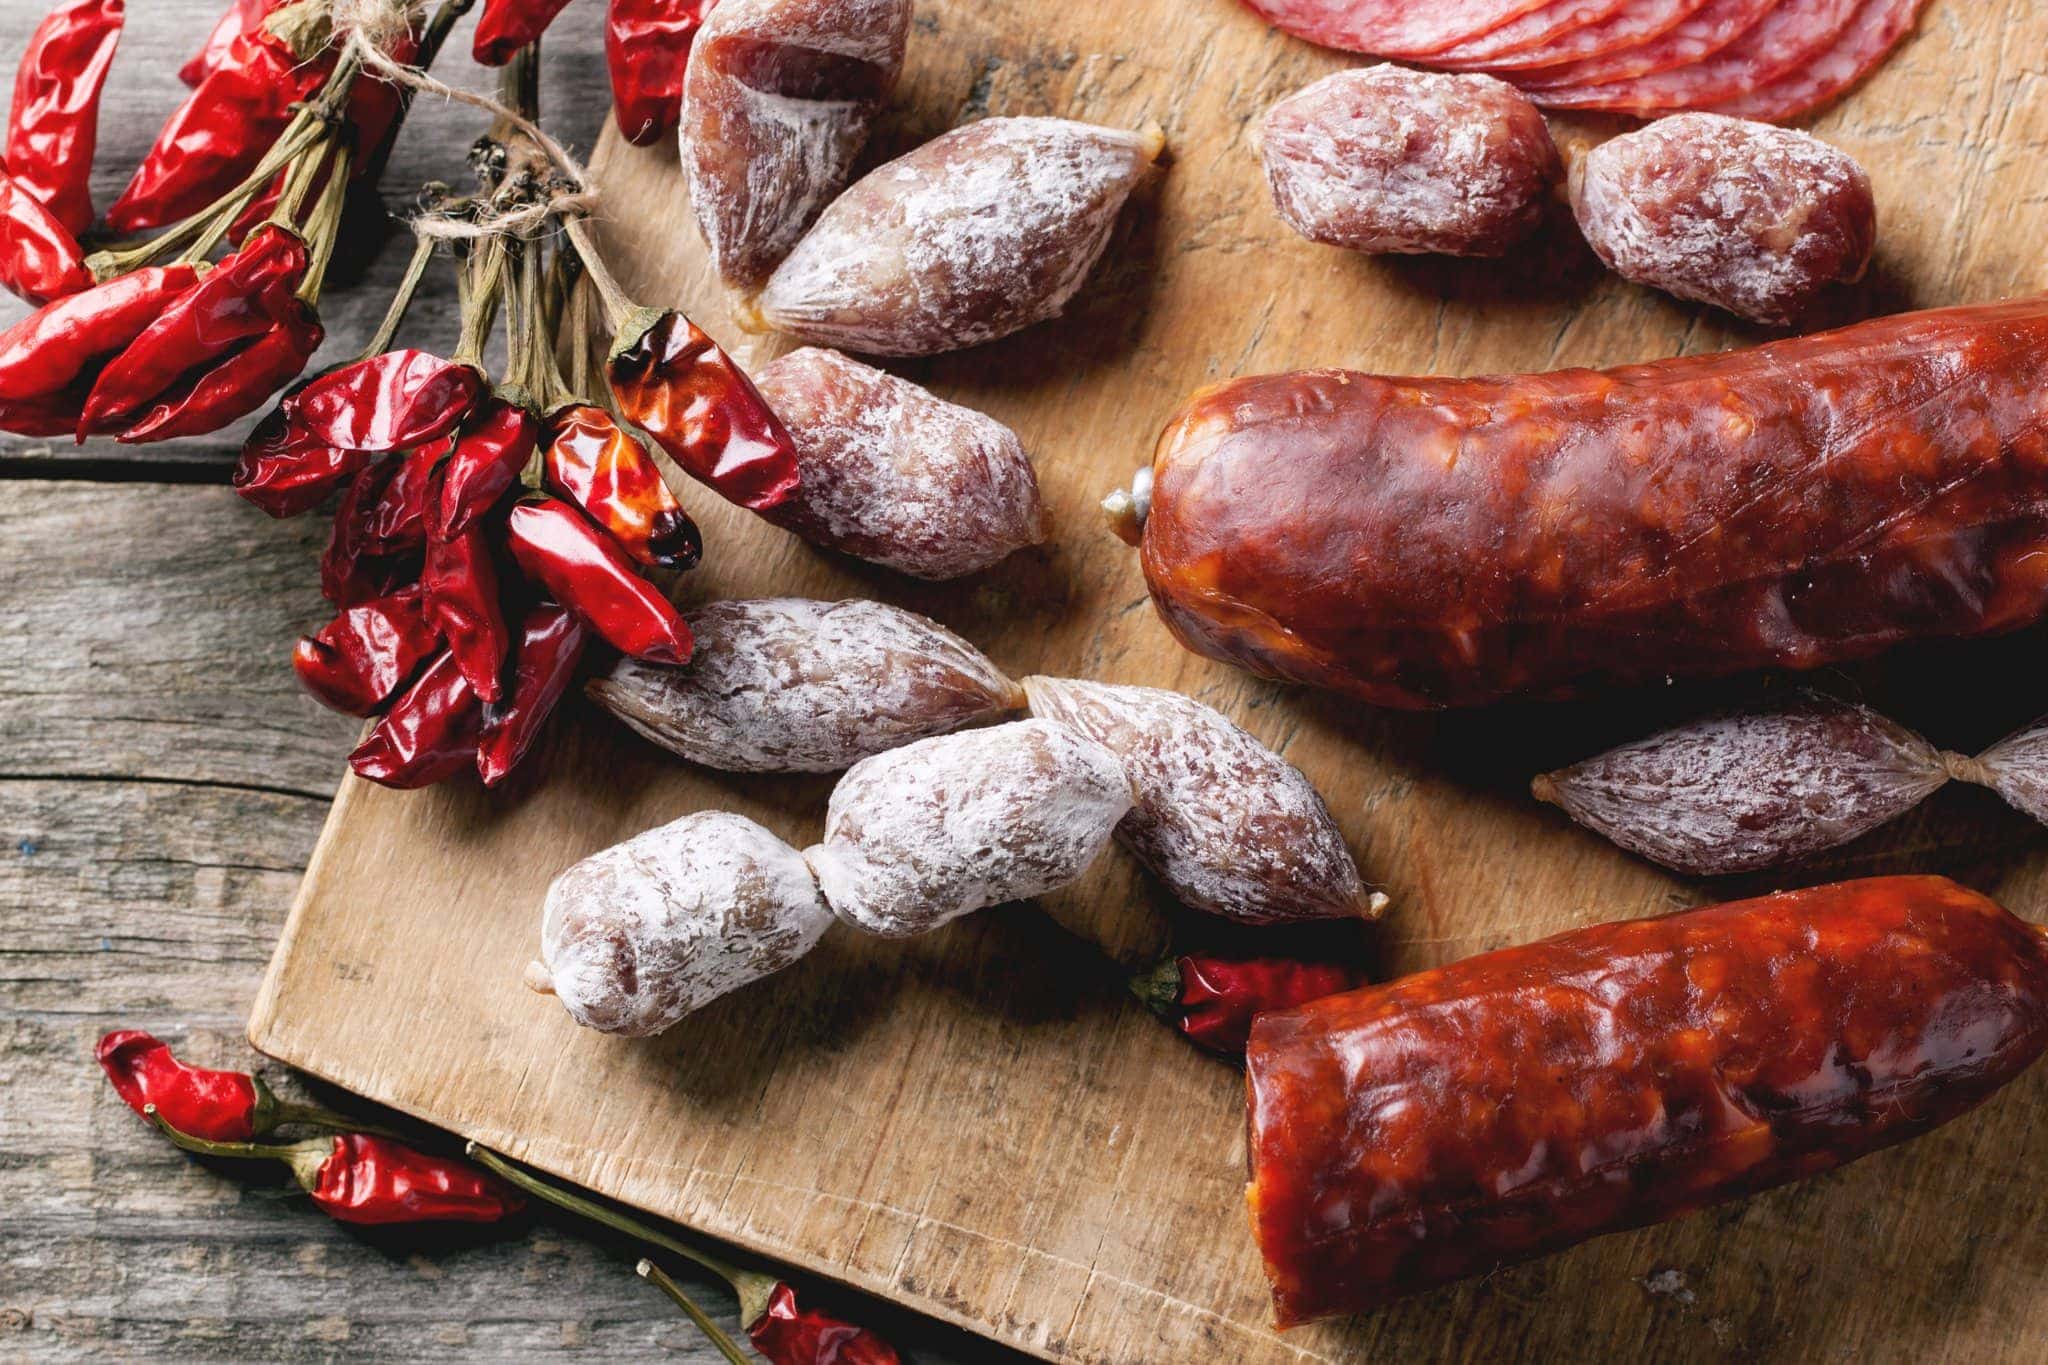 What is salami made of might surprise you.